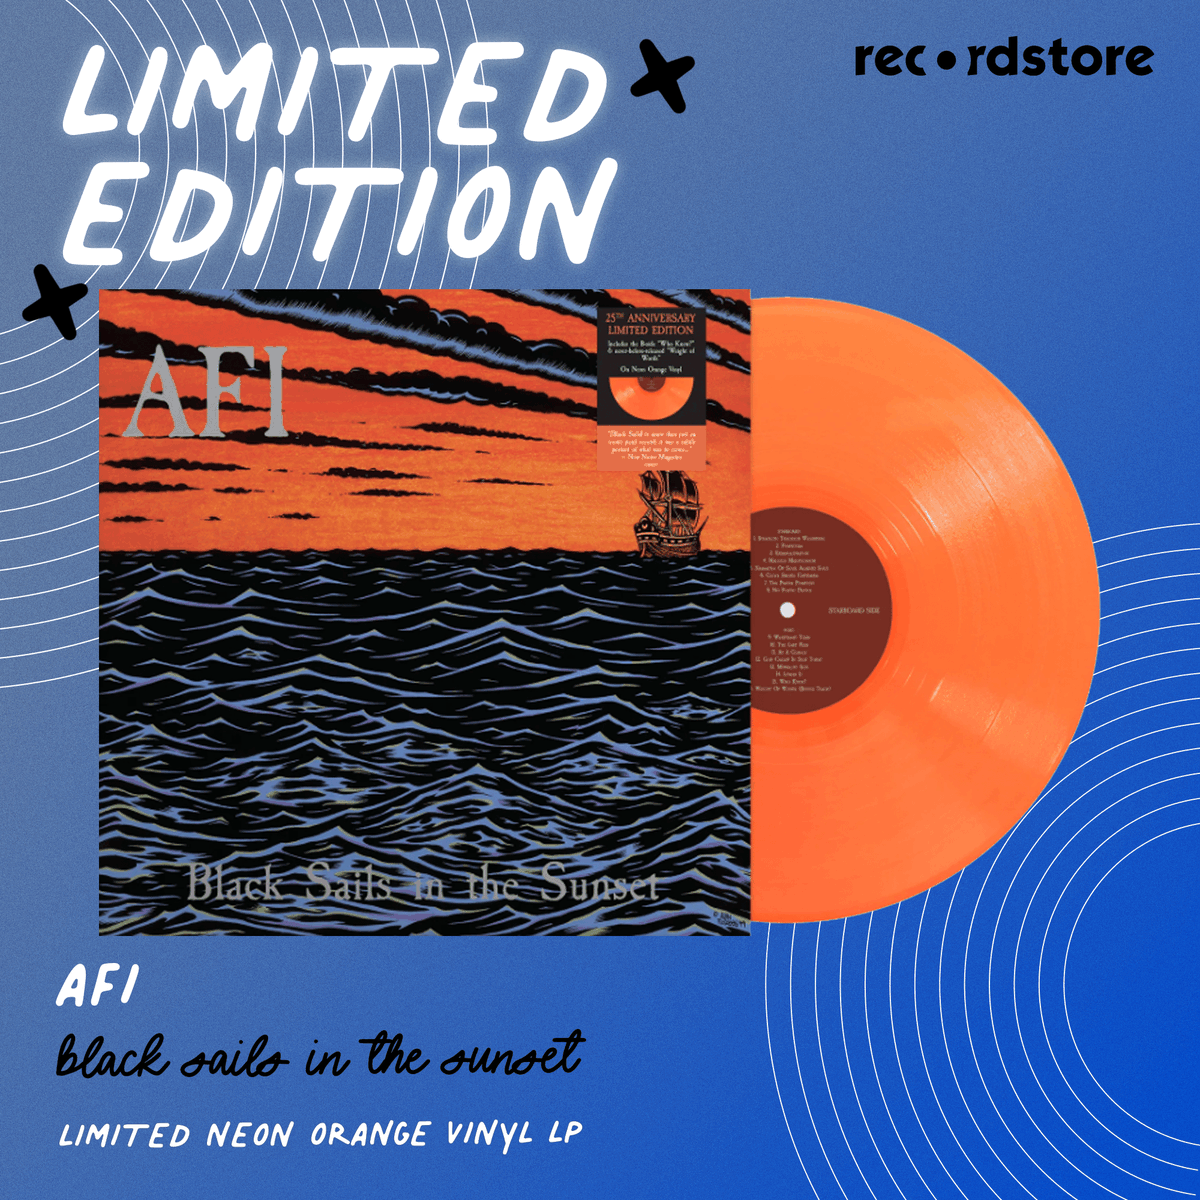 LIMITED | AFI - Black Sails In The Sunset: Limited Neon Orange Vinyl LP

In celebration of the 25th anniversary of AFI’s 4th studio album, this limited pressing features 3 bonus tracks and a never-before-released track!

Shop now > lnk.to/VBjbXkTP

@AFI | @CraftRecordings